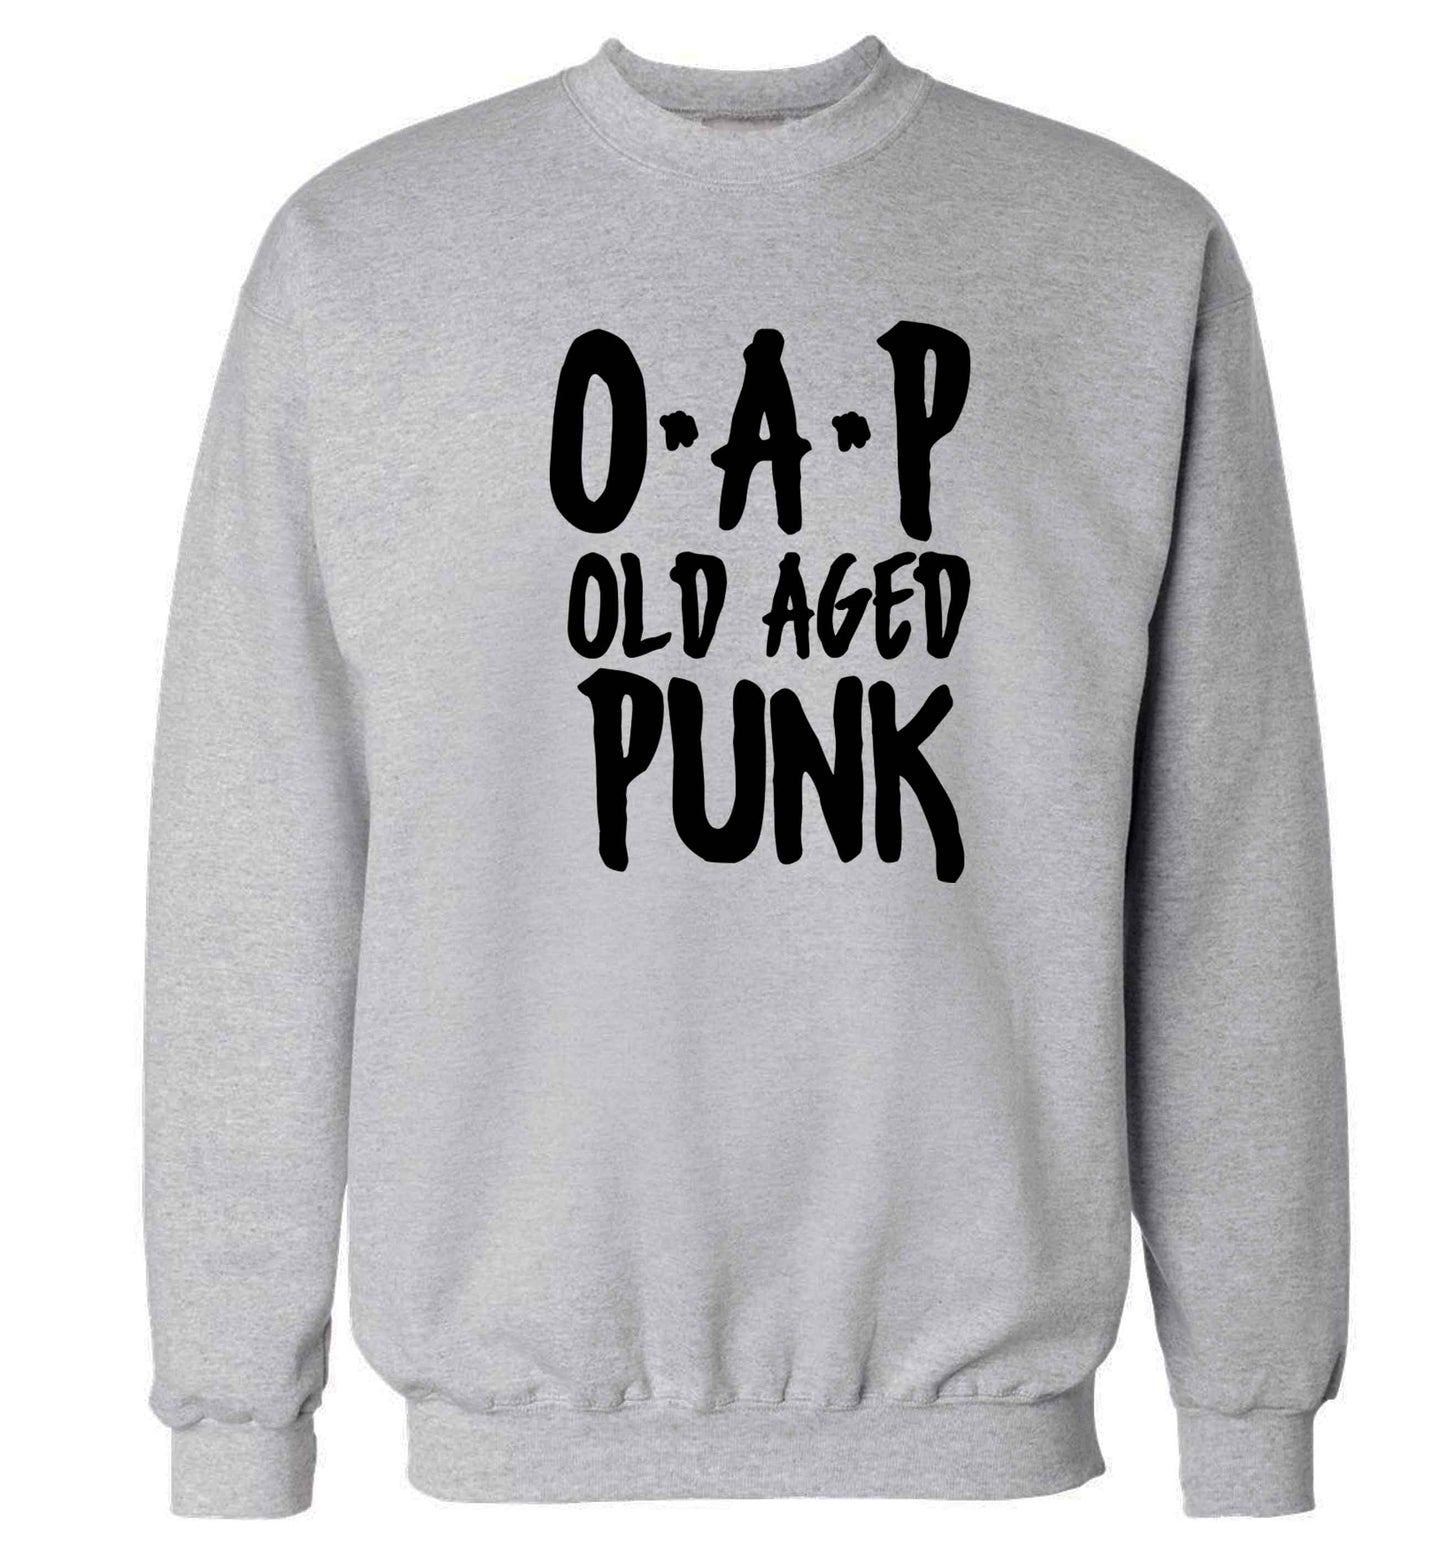 O.A.P Old Age Punk Adult's unisex grey Sweater 2XL